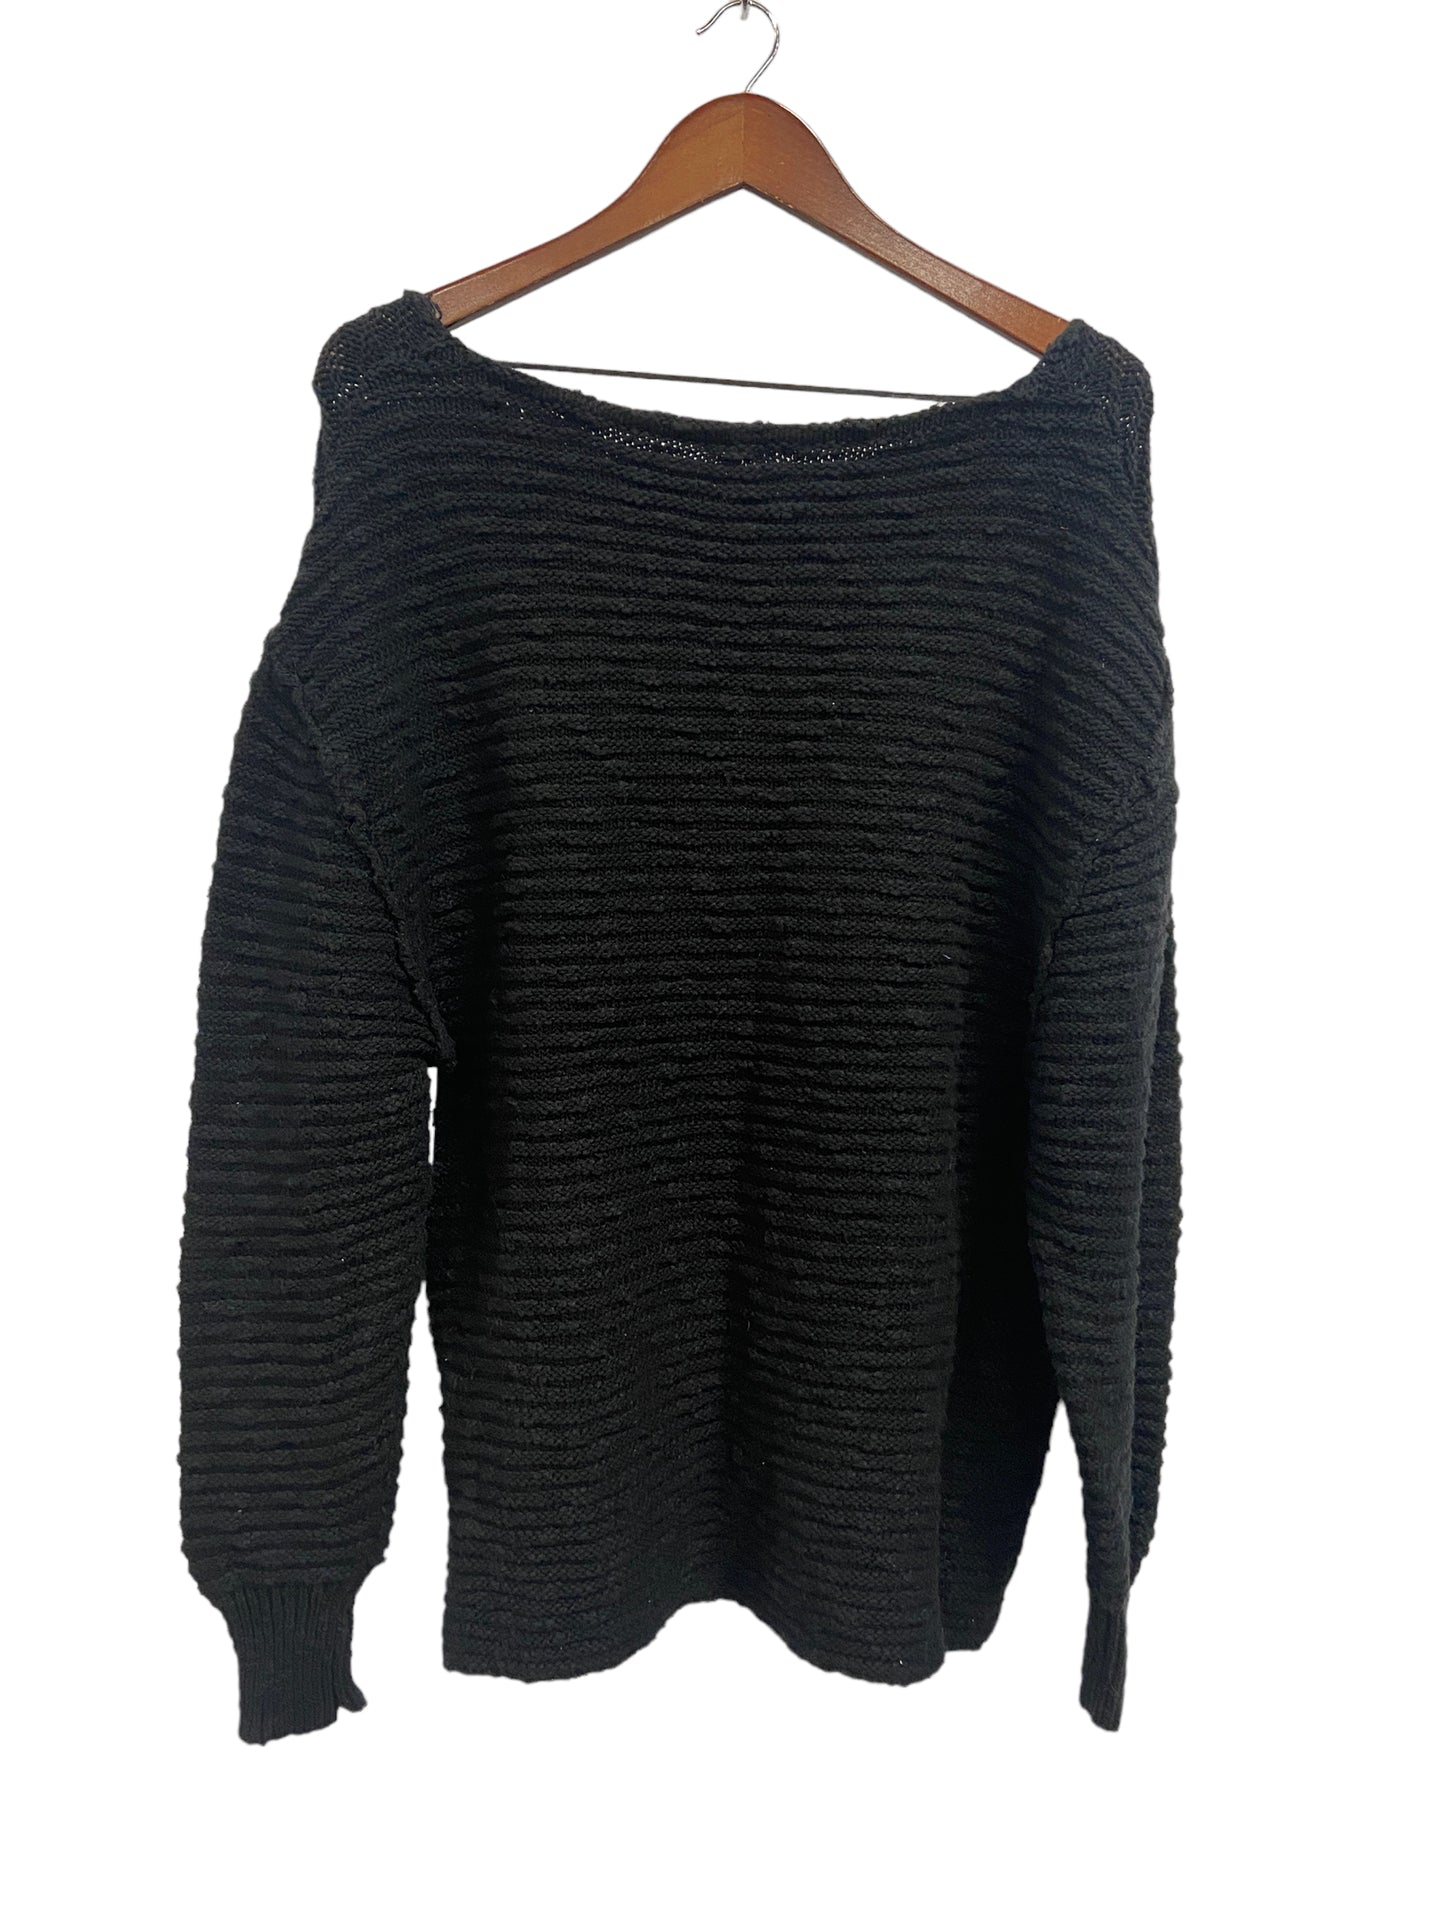 Sweater By Free People  Size: Petite   Small